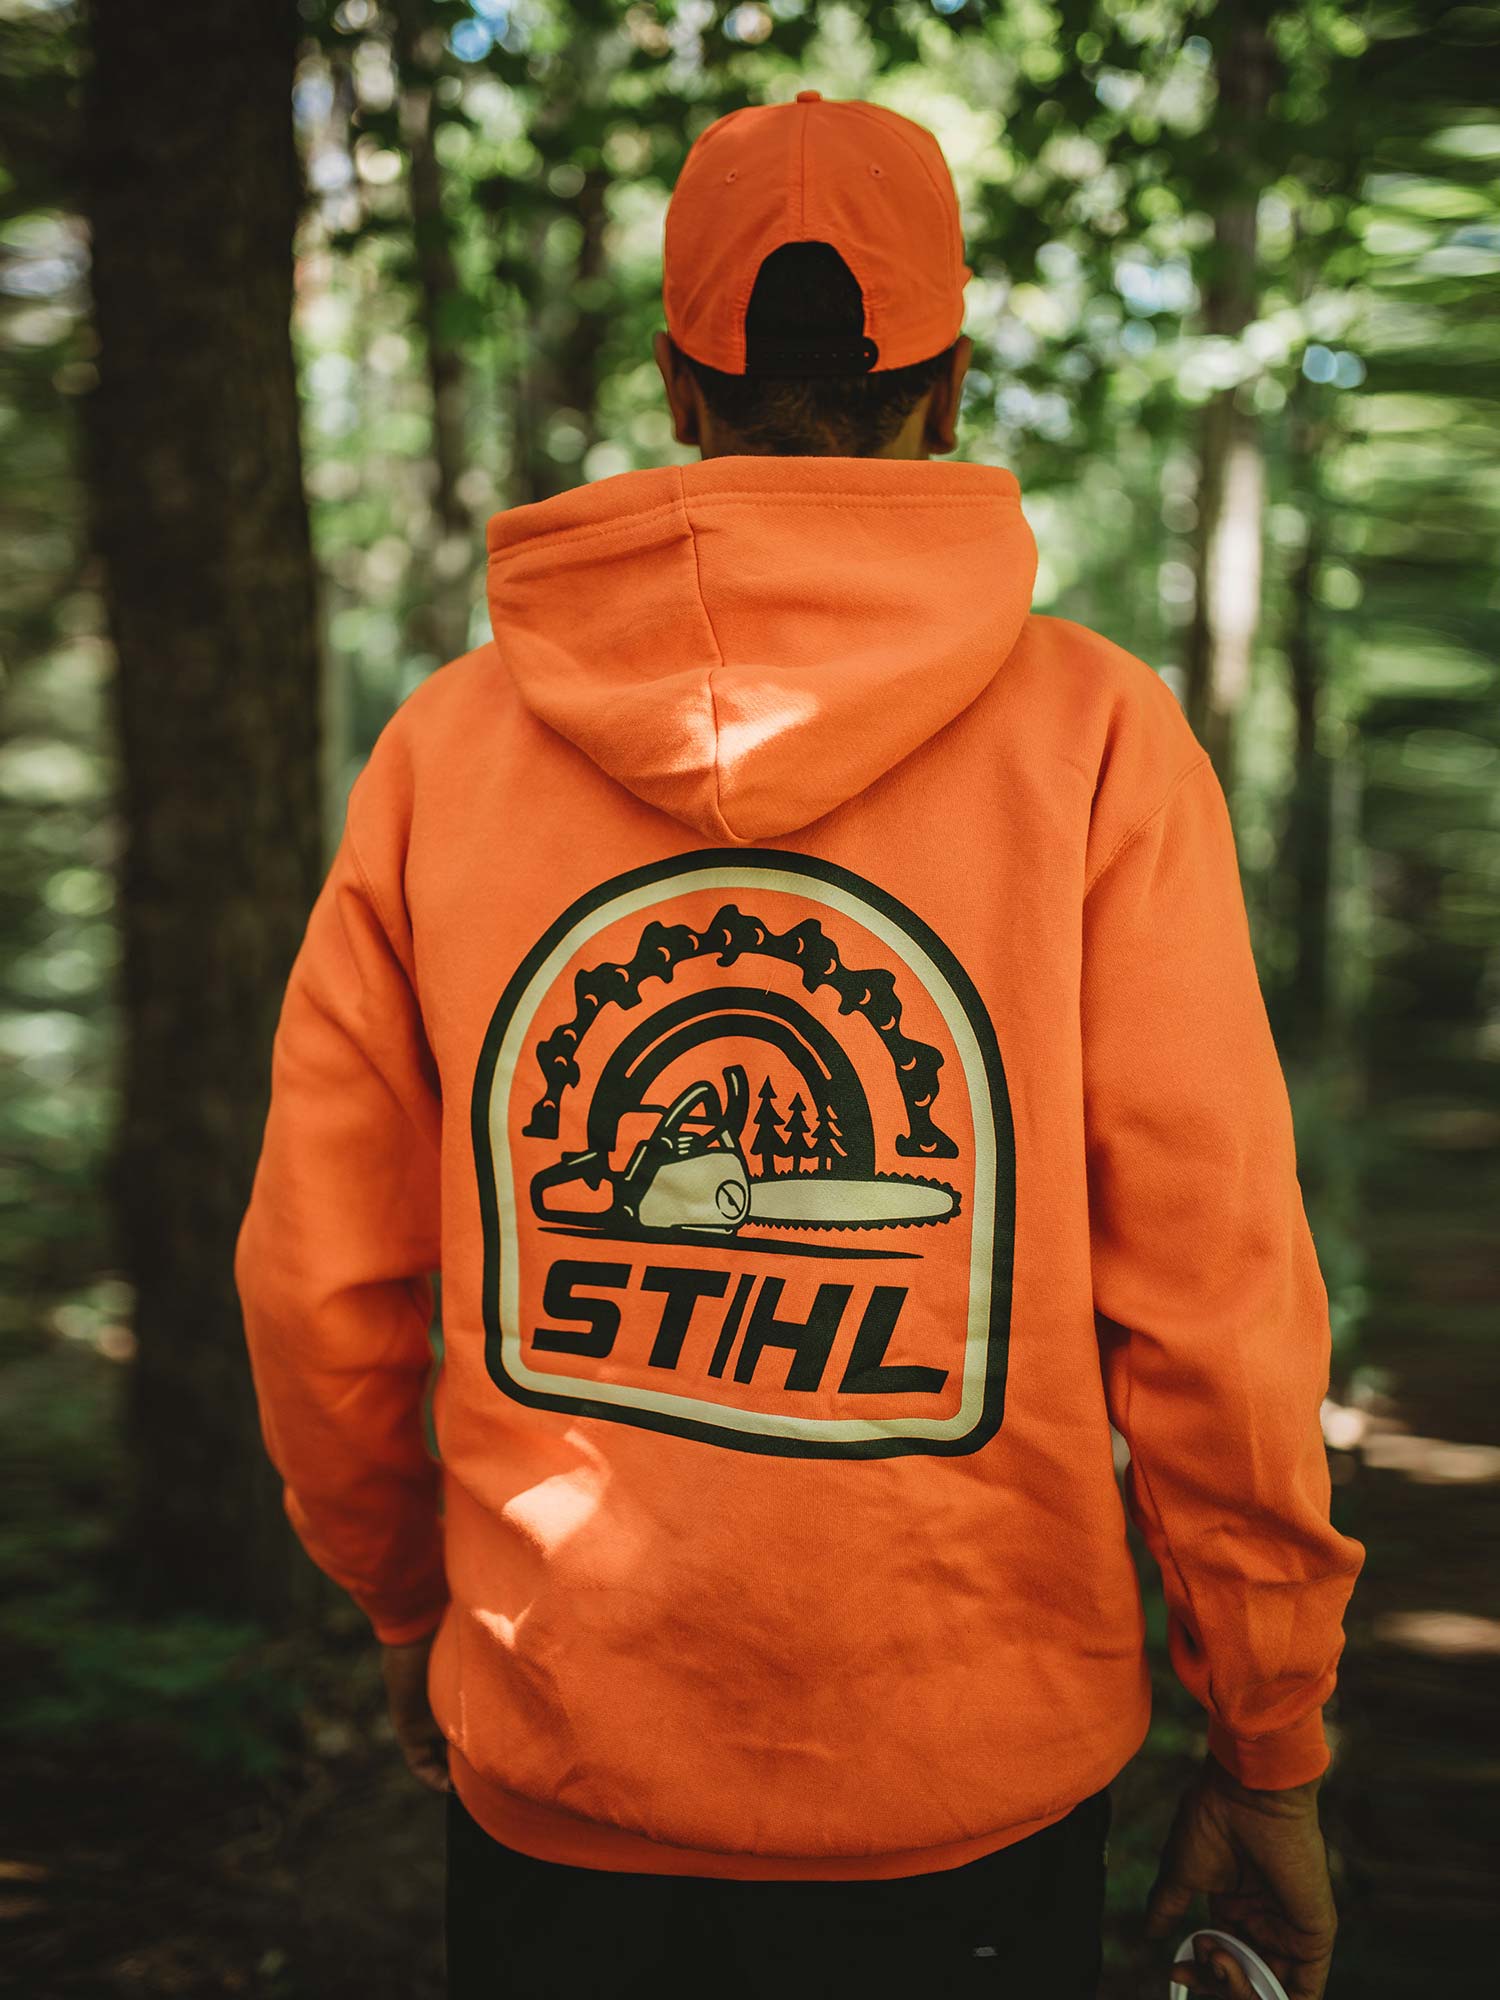 STIHL OUTFITTERS™ - Officially Licensed Merchandise